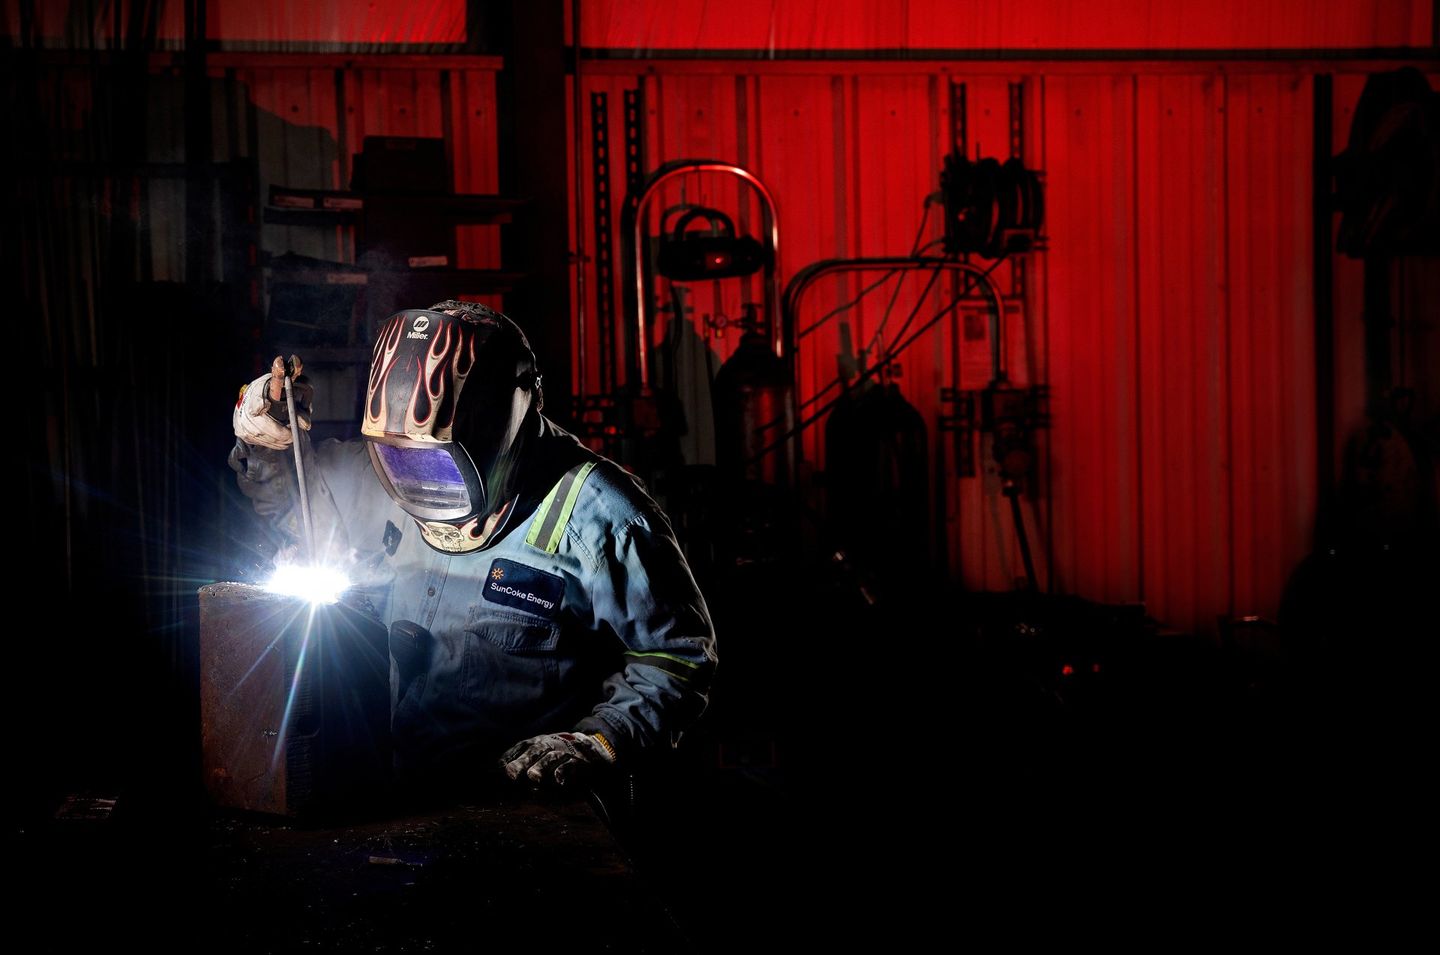 Photo shows a welder working in a facility. The welder is lit from the flame.